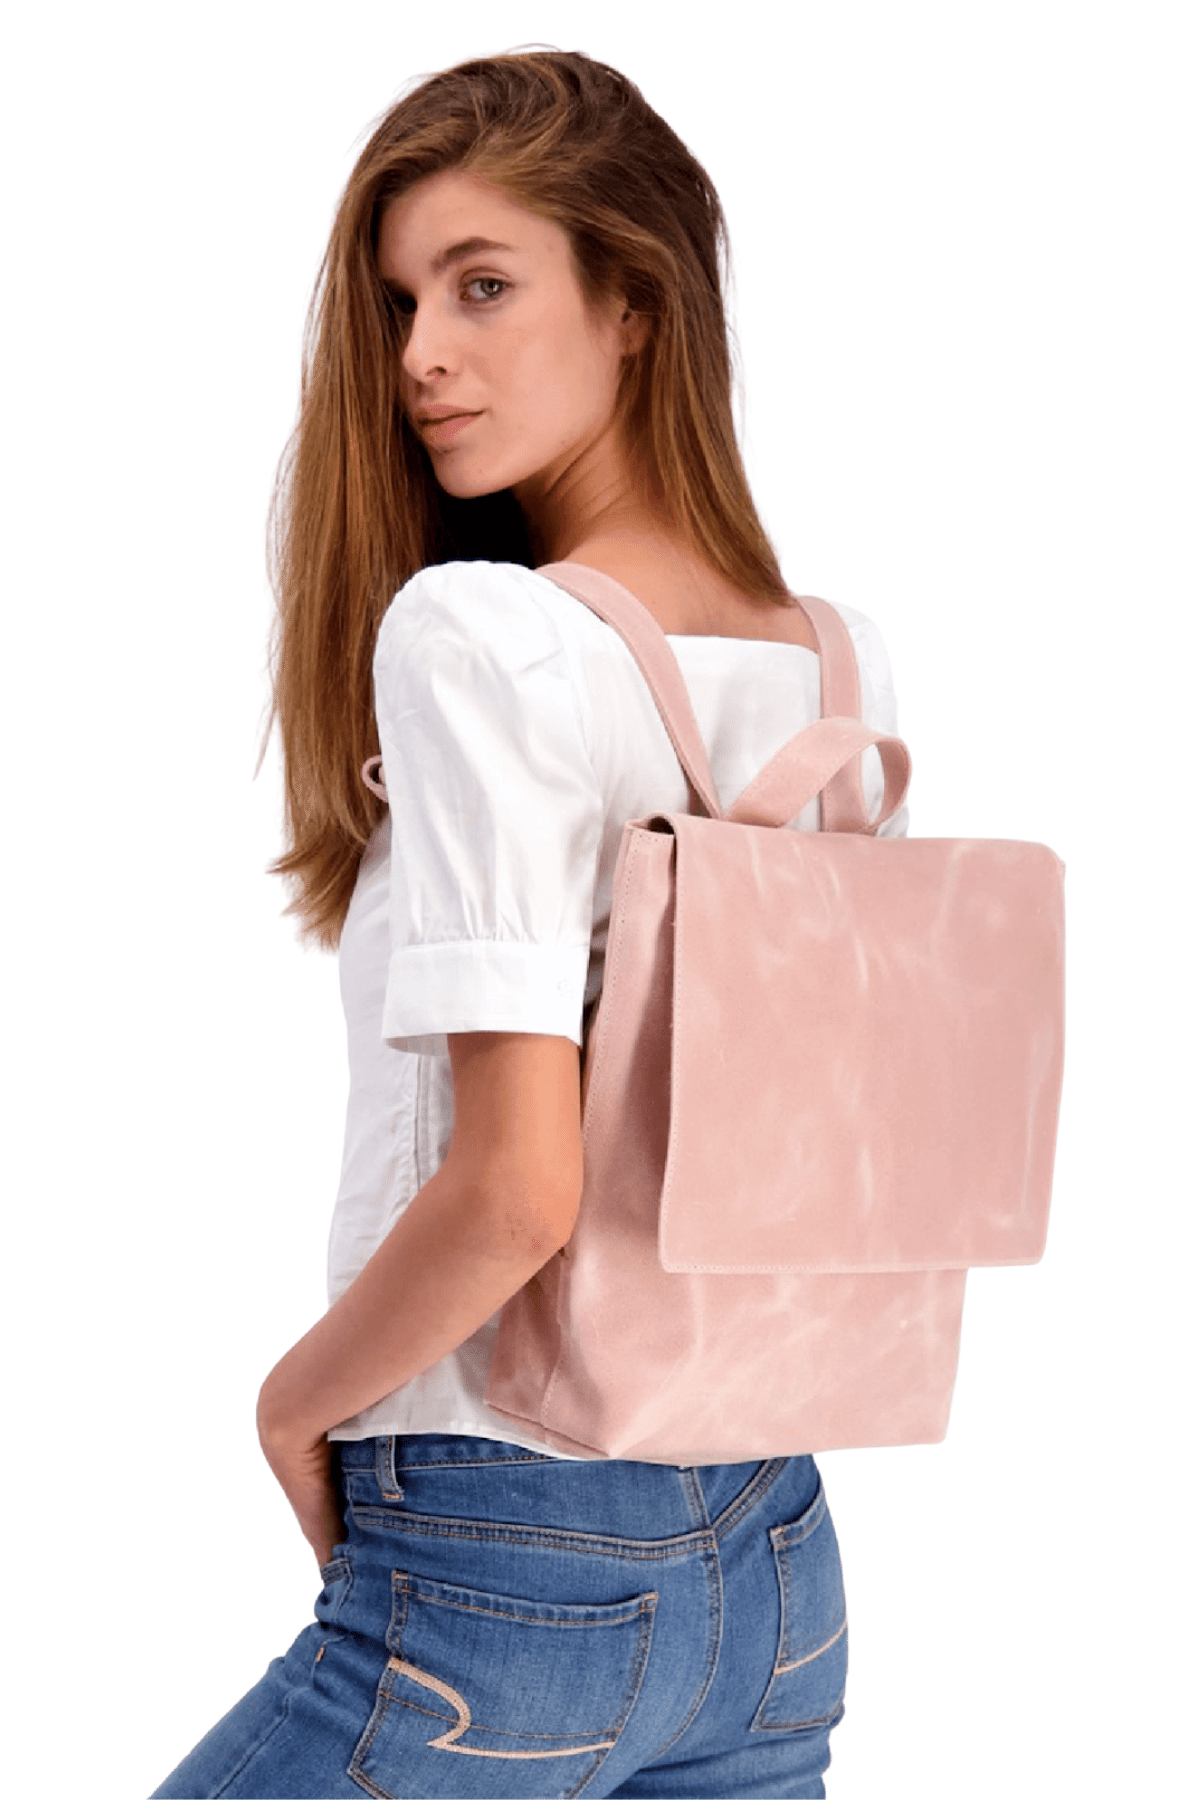 Woman Leather Backpack, Woman Backpack, Laptop Backpack, Backpack, Leather Backpack, Large Backpack, Mayko, Pink Backpack, Pink Leather Backpack, Handmade Backpack, Handcrafted, Minimalistic Design, Everyday Bag, Leather Backpack Purse For Women ||Pink||